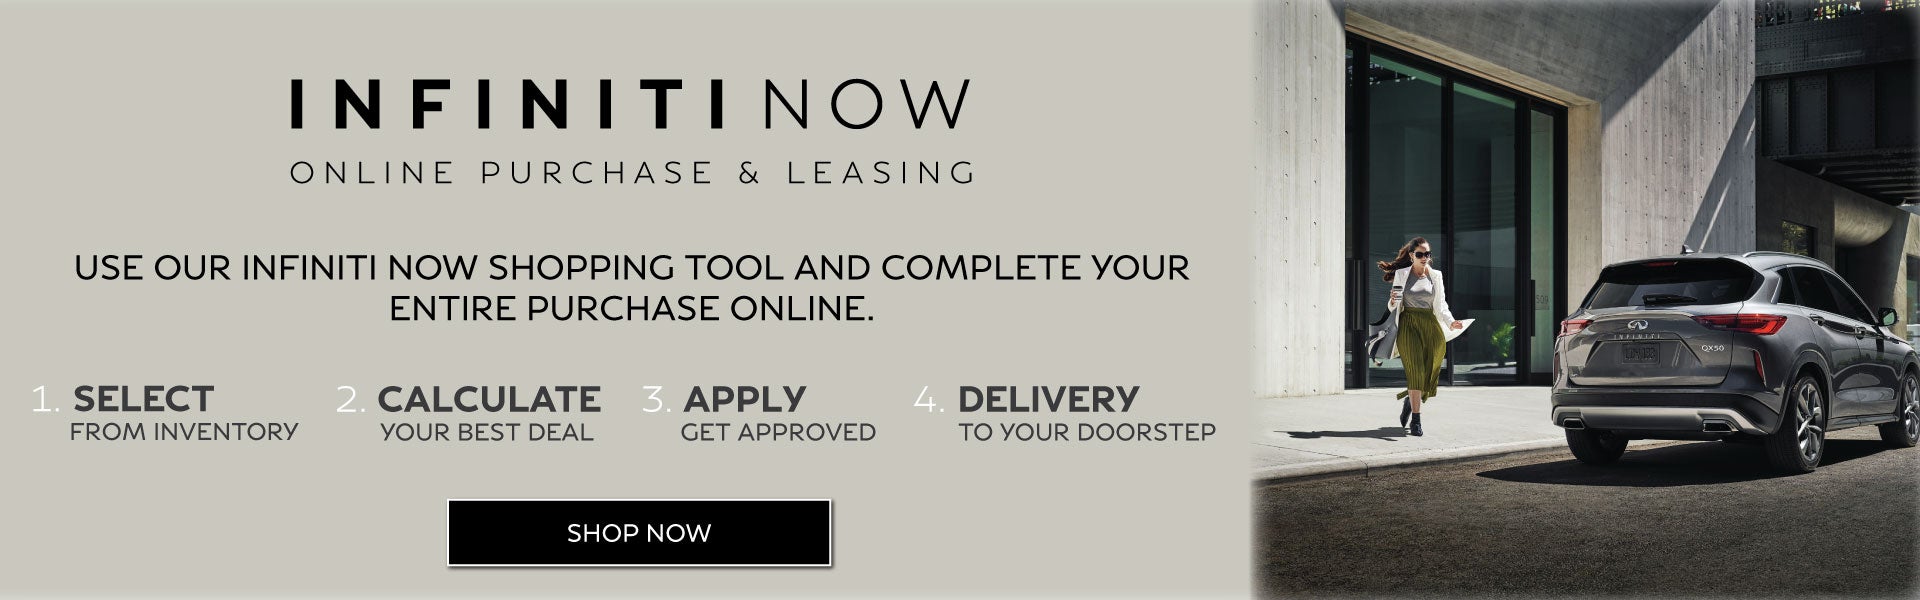 INFINITI NOW Online Purchase & Leasing